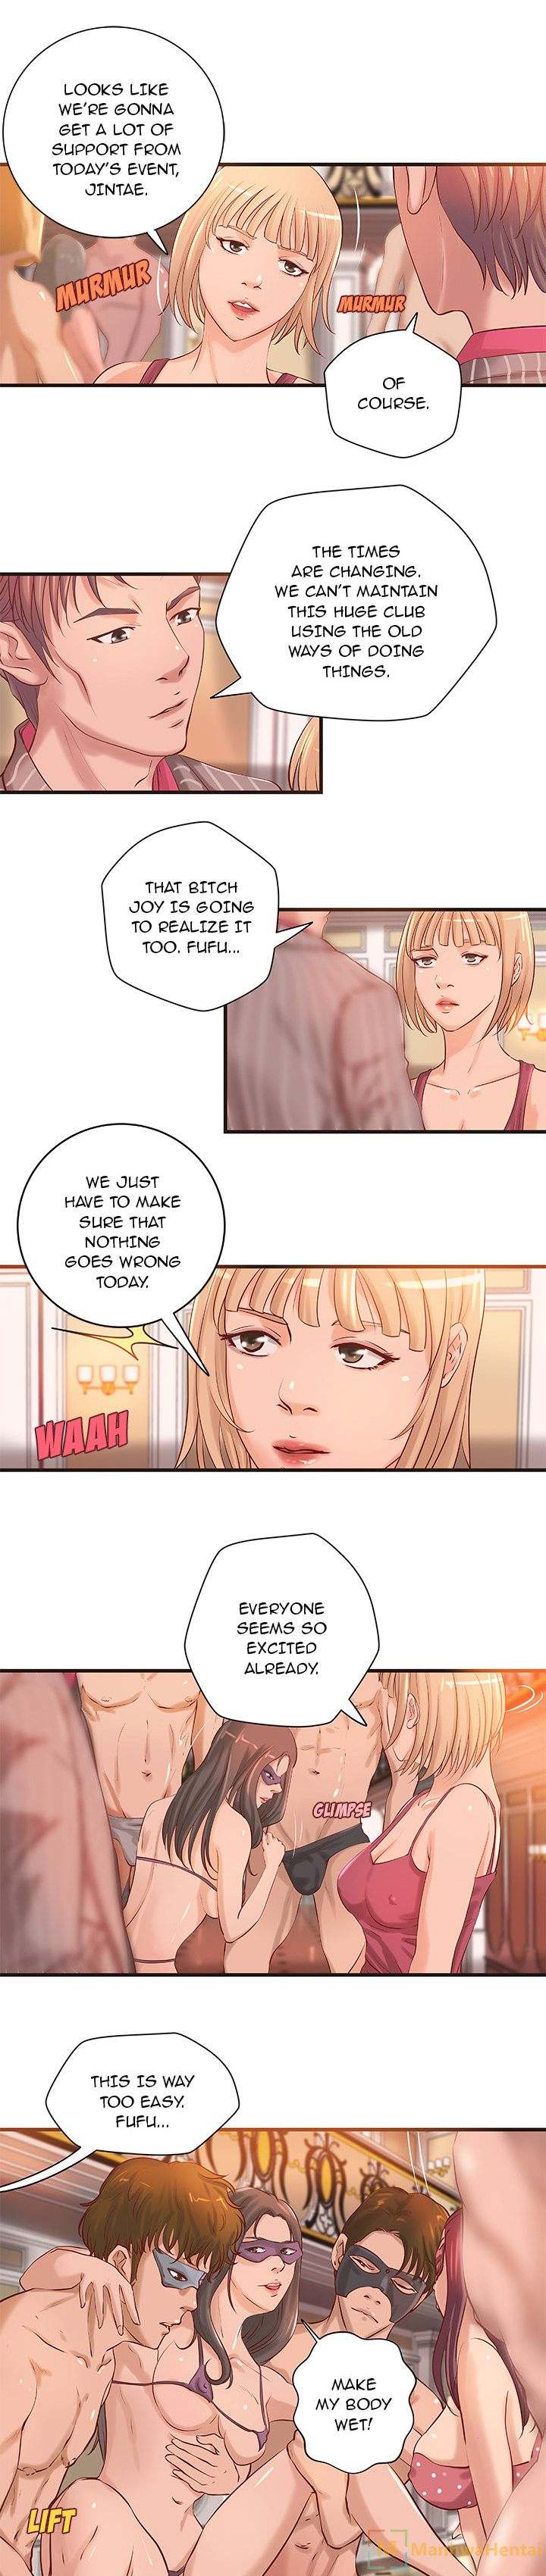 Taste of a Woman - Chapter 18 Page 1